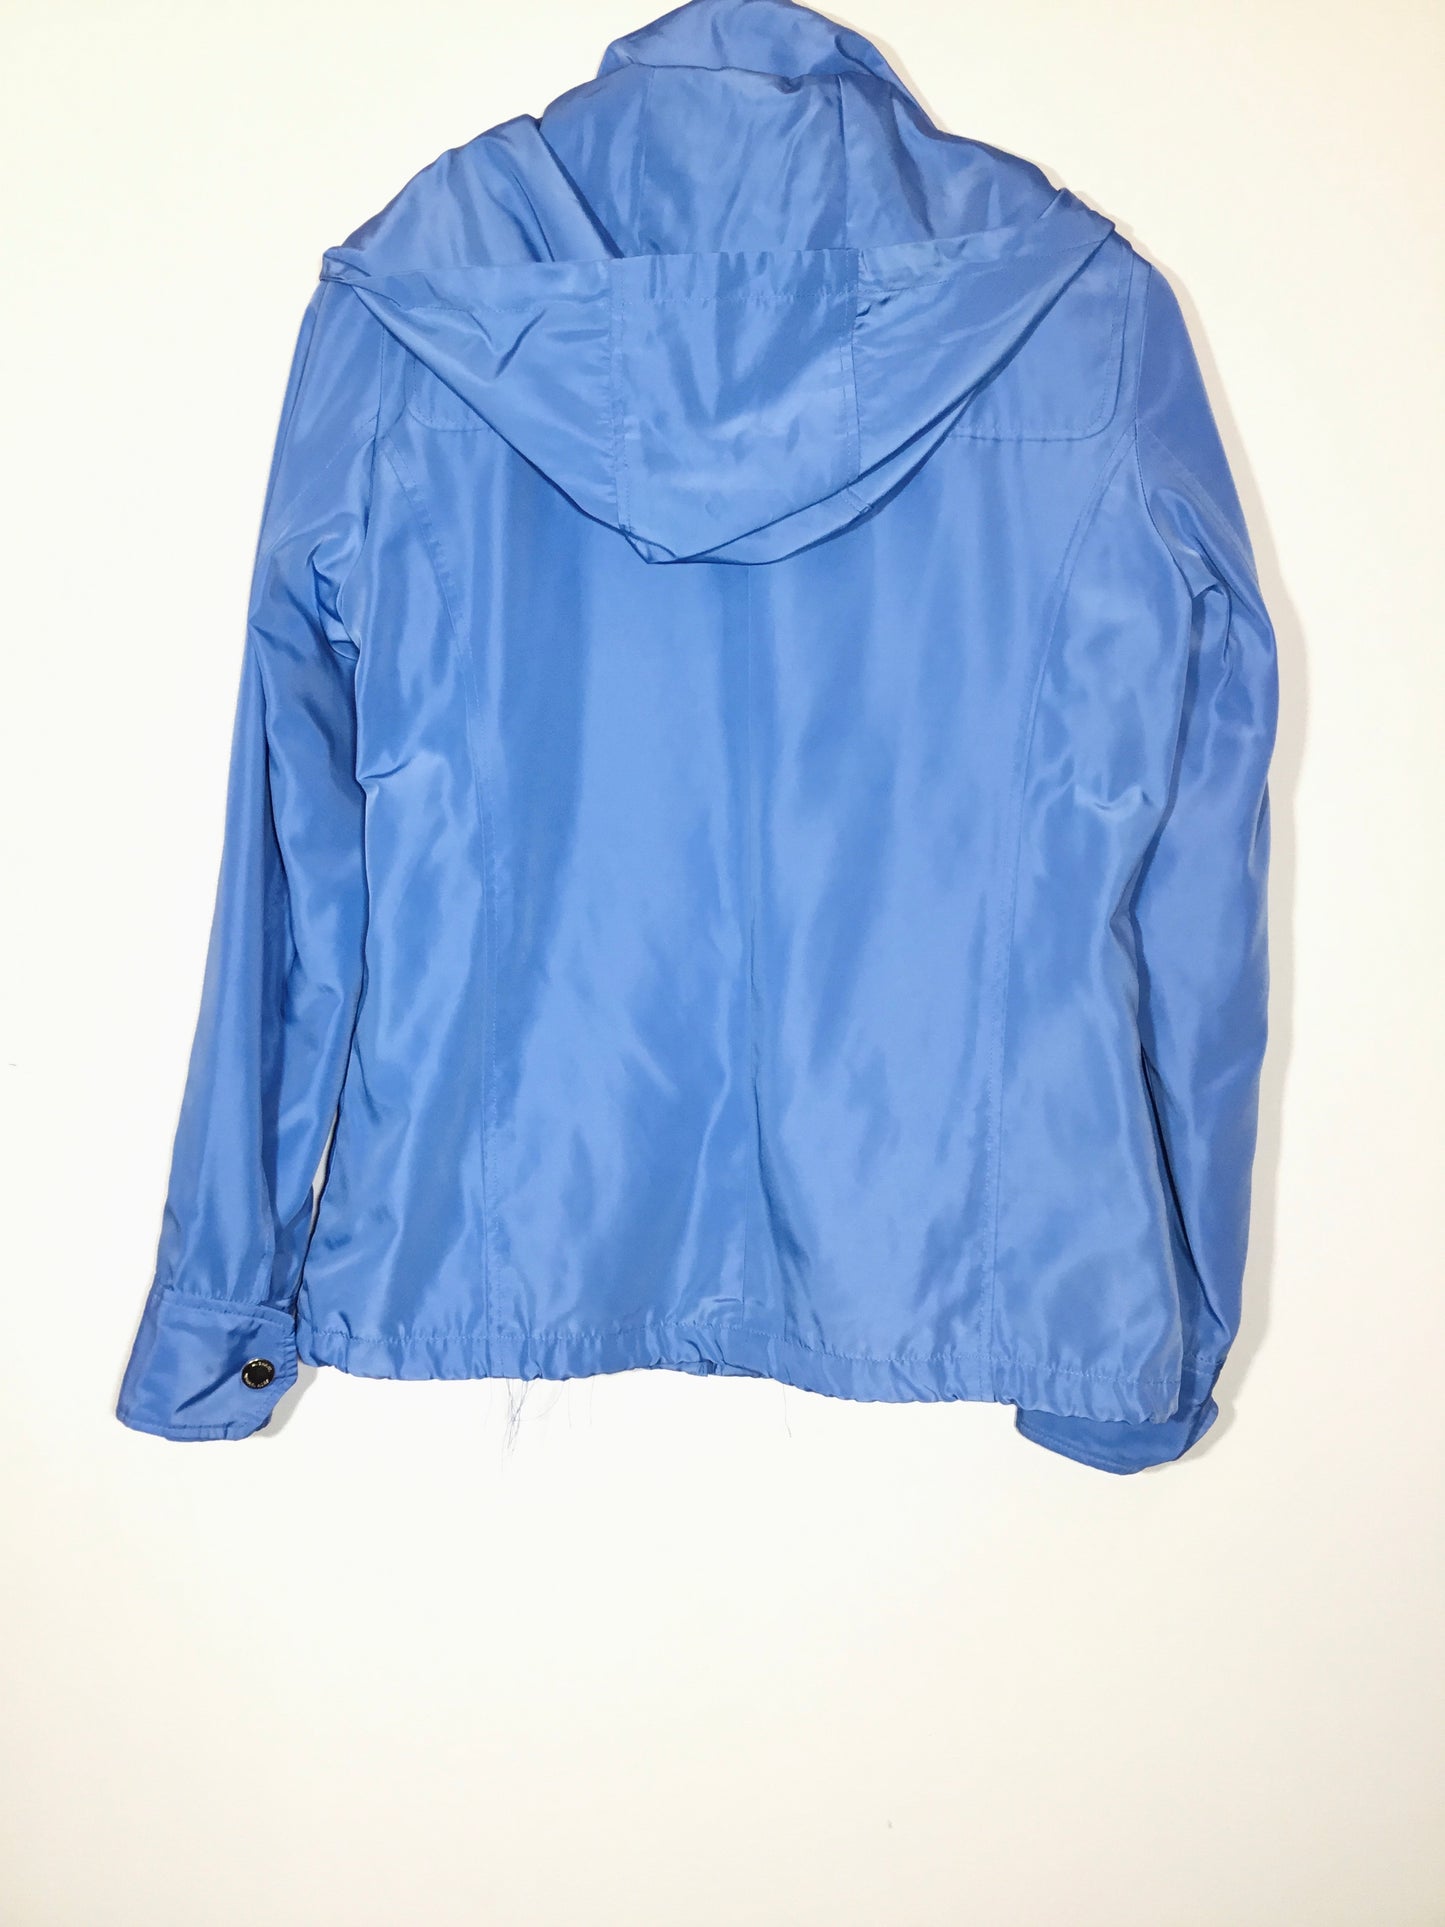 Jacket Other By Michael Kors  Size: Xs